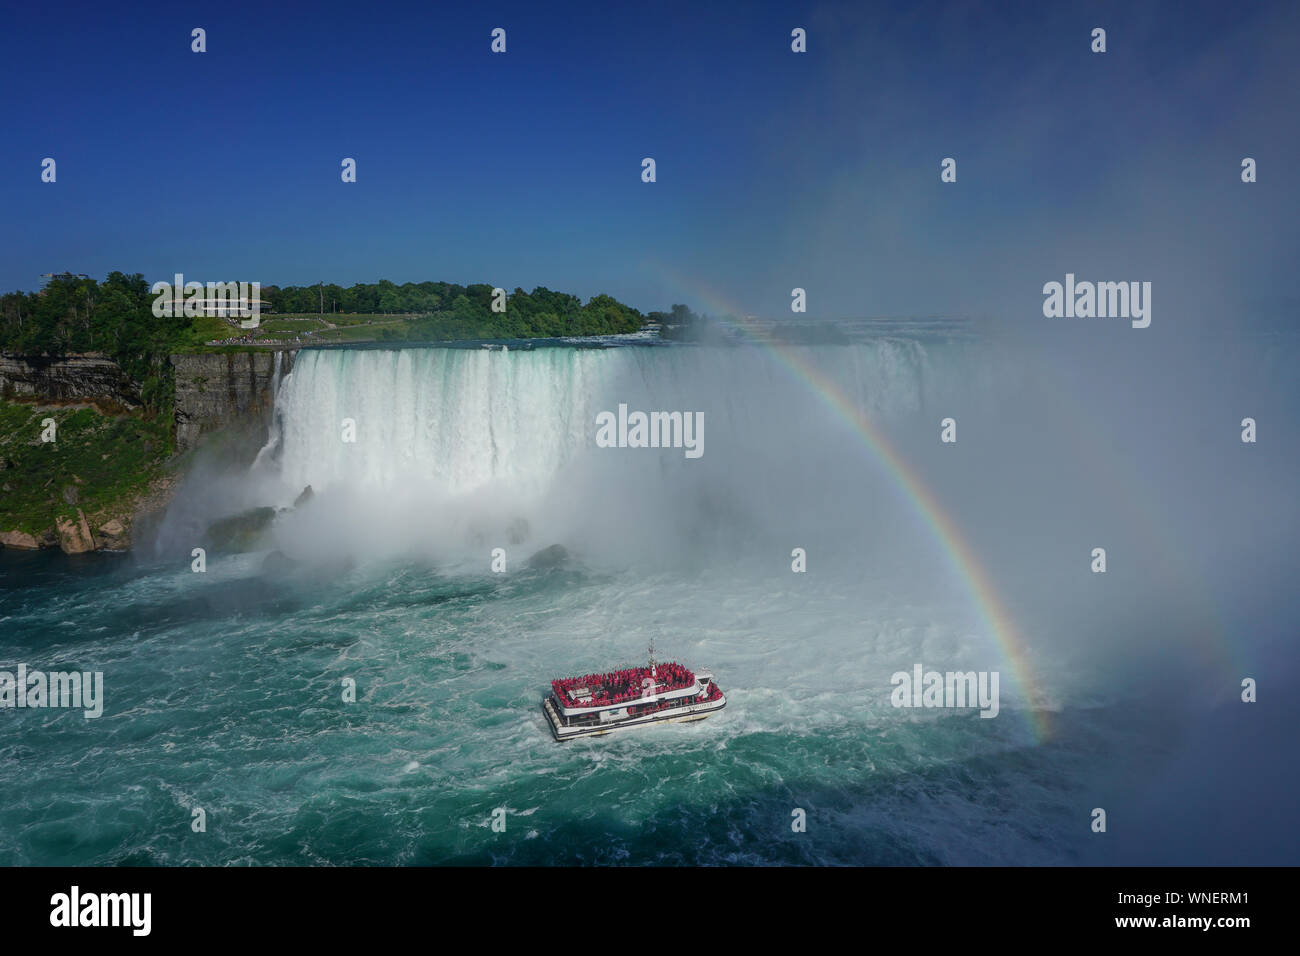 Niagara Falls, Ontario, Canada: A double rainbow appears over the Niagara River as a tour boat takes visitors to the foot of the Horseshoe Falls. Stock Photo